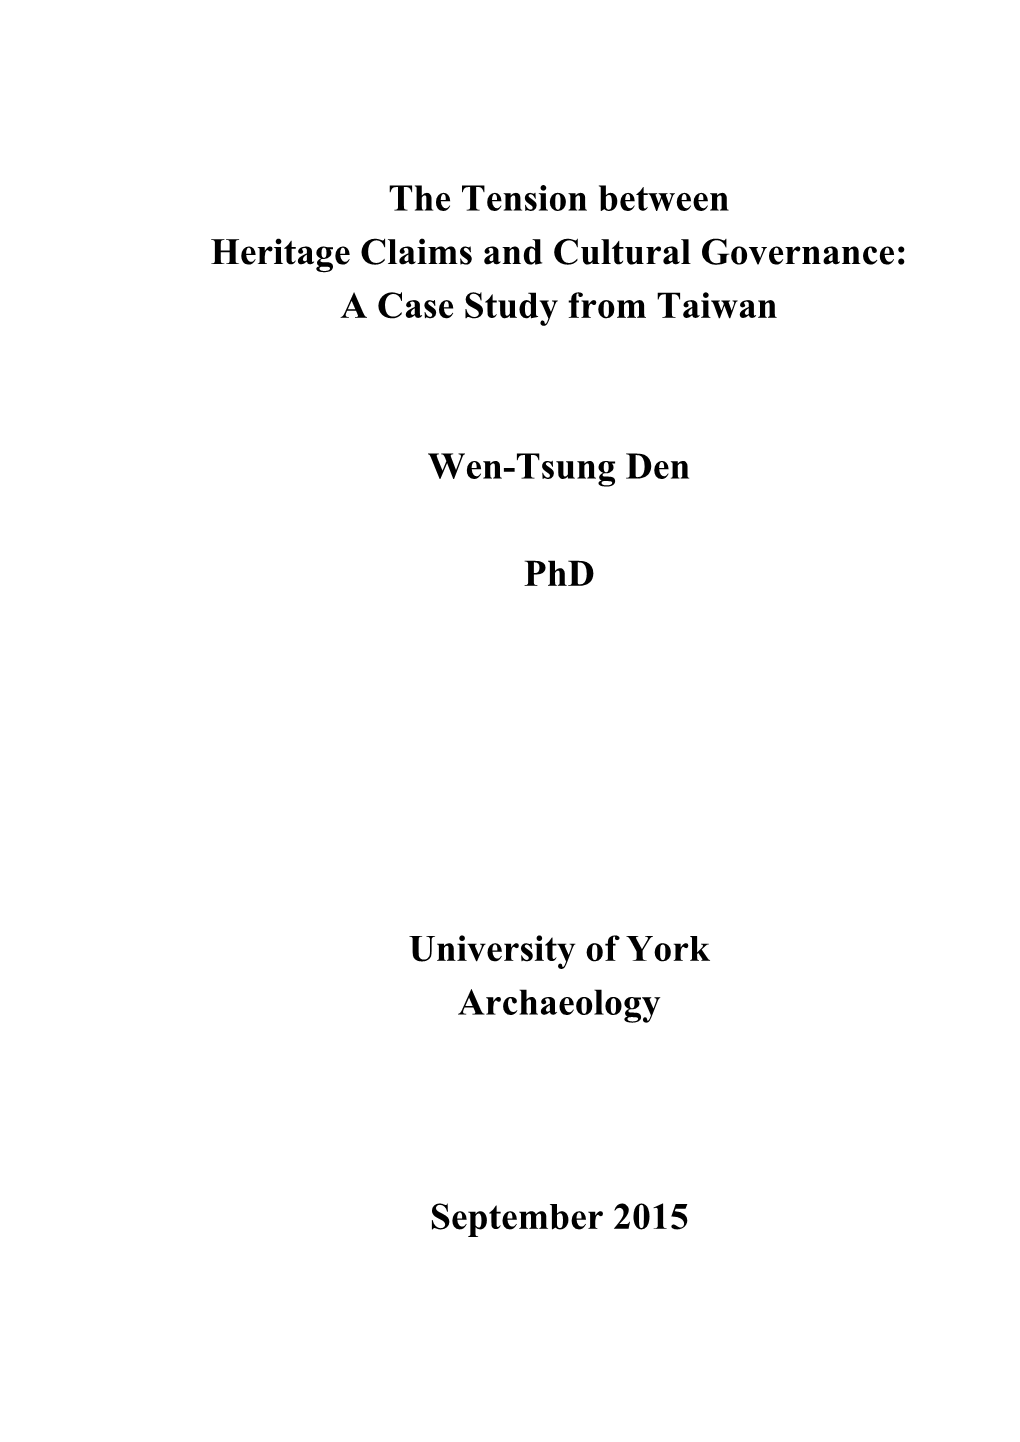 The Tension Between Heritage Claims and Cultural Governance: a Case Study from Taiwan